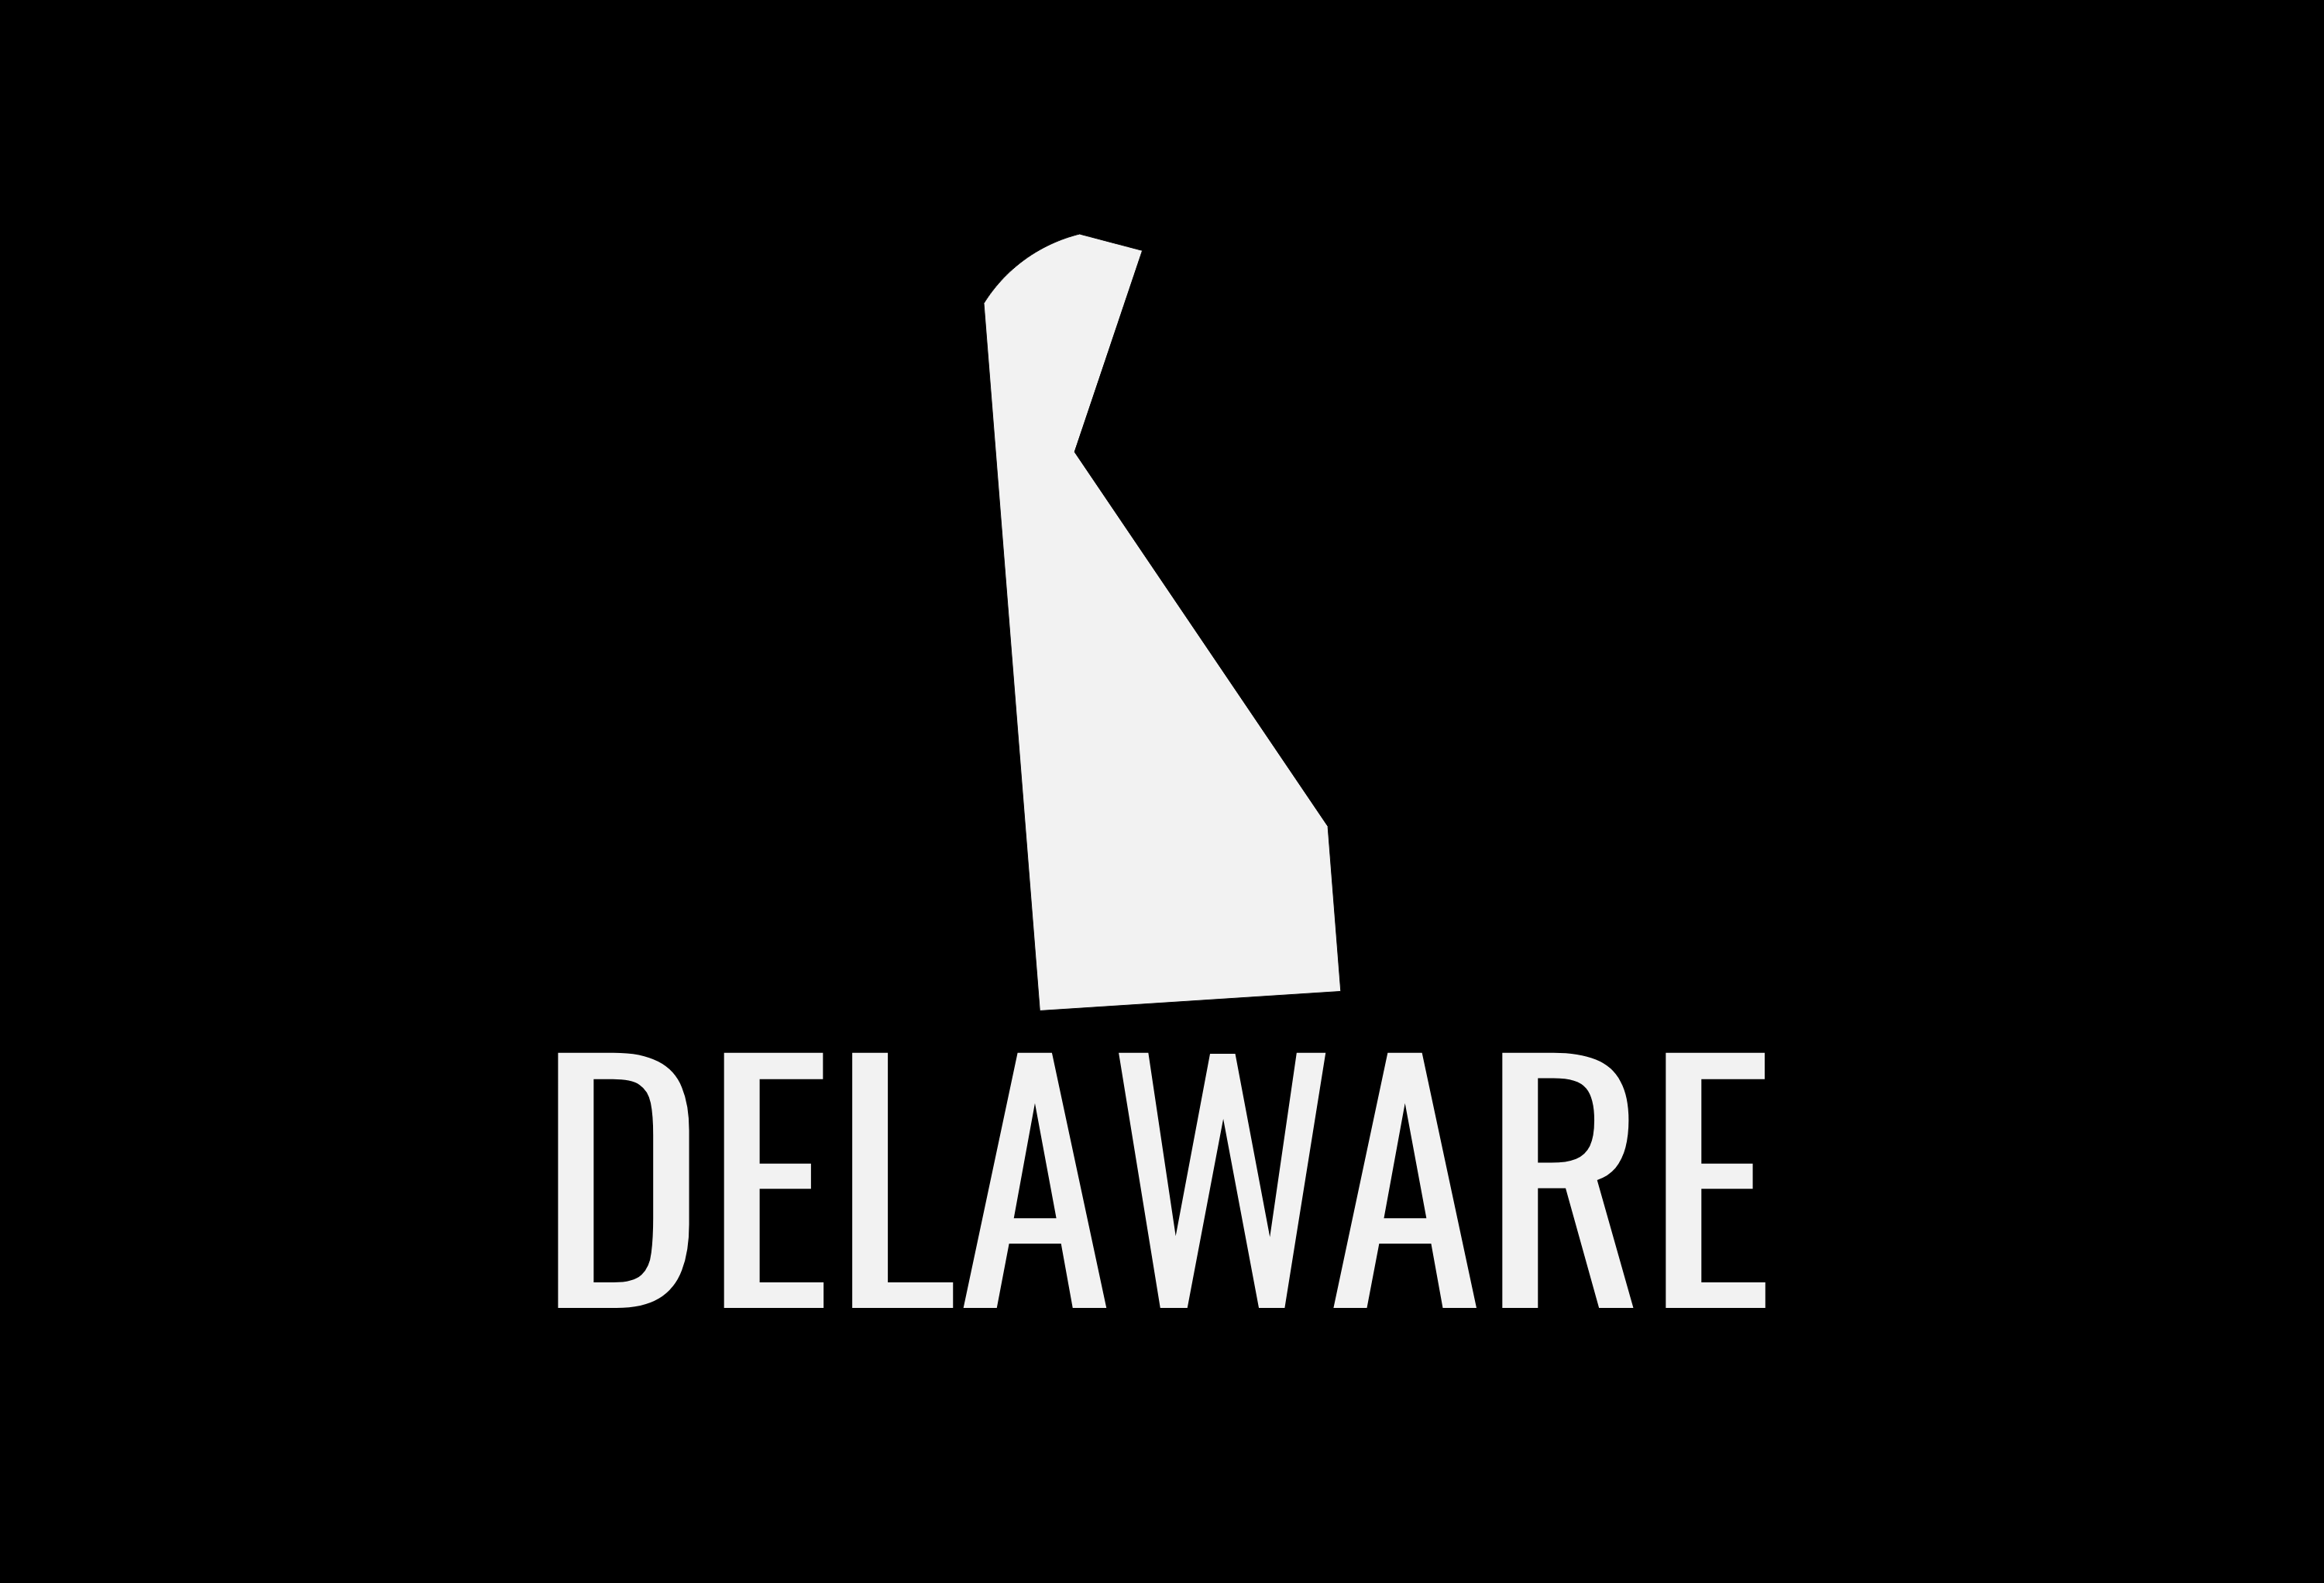 Delaware State Map Car Decal - Permanent Vinyl Sticker for Cars, Vehicle, Doors, Windows, Laptop, and more!